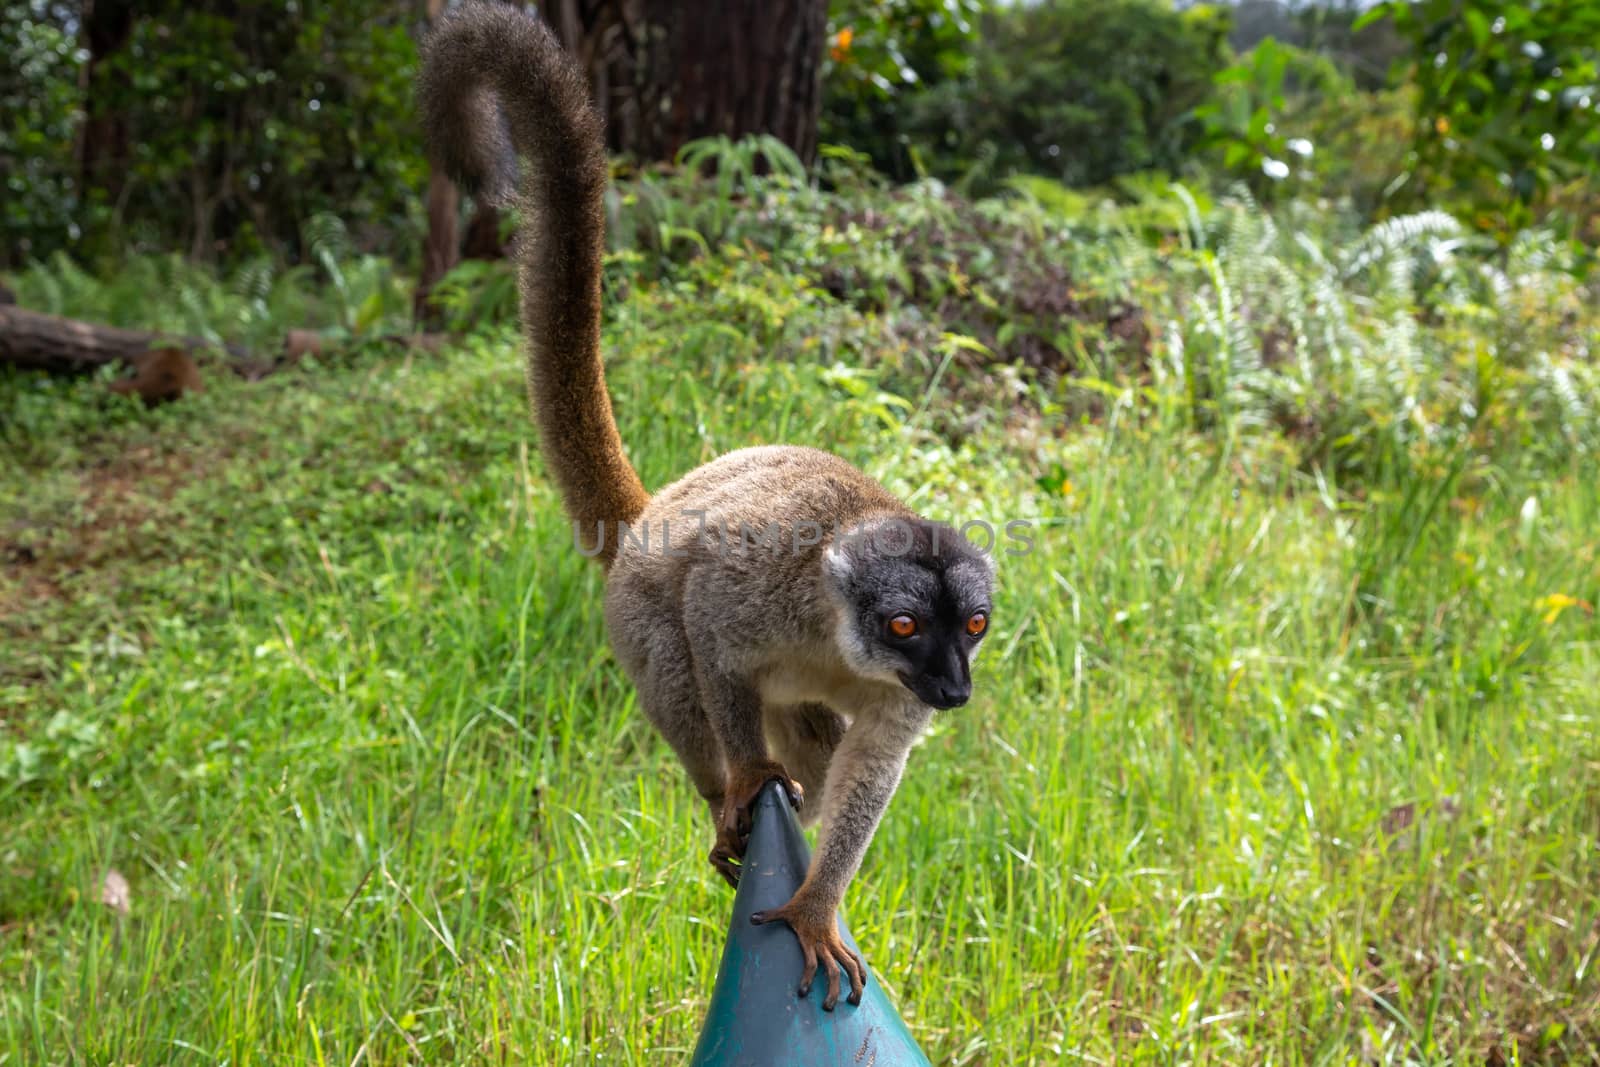 Some Brown lemurs play in the meadow and a tree trunk and are waiting for the visitors